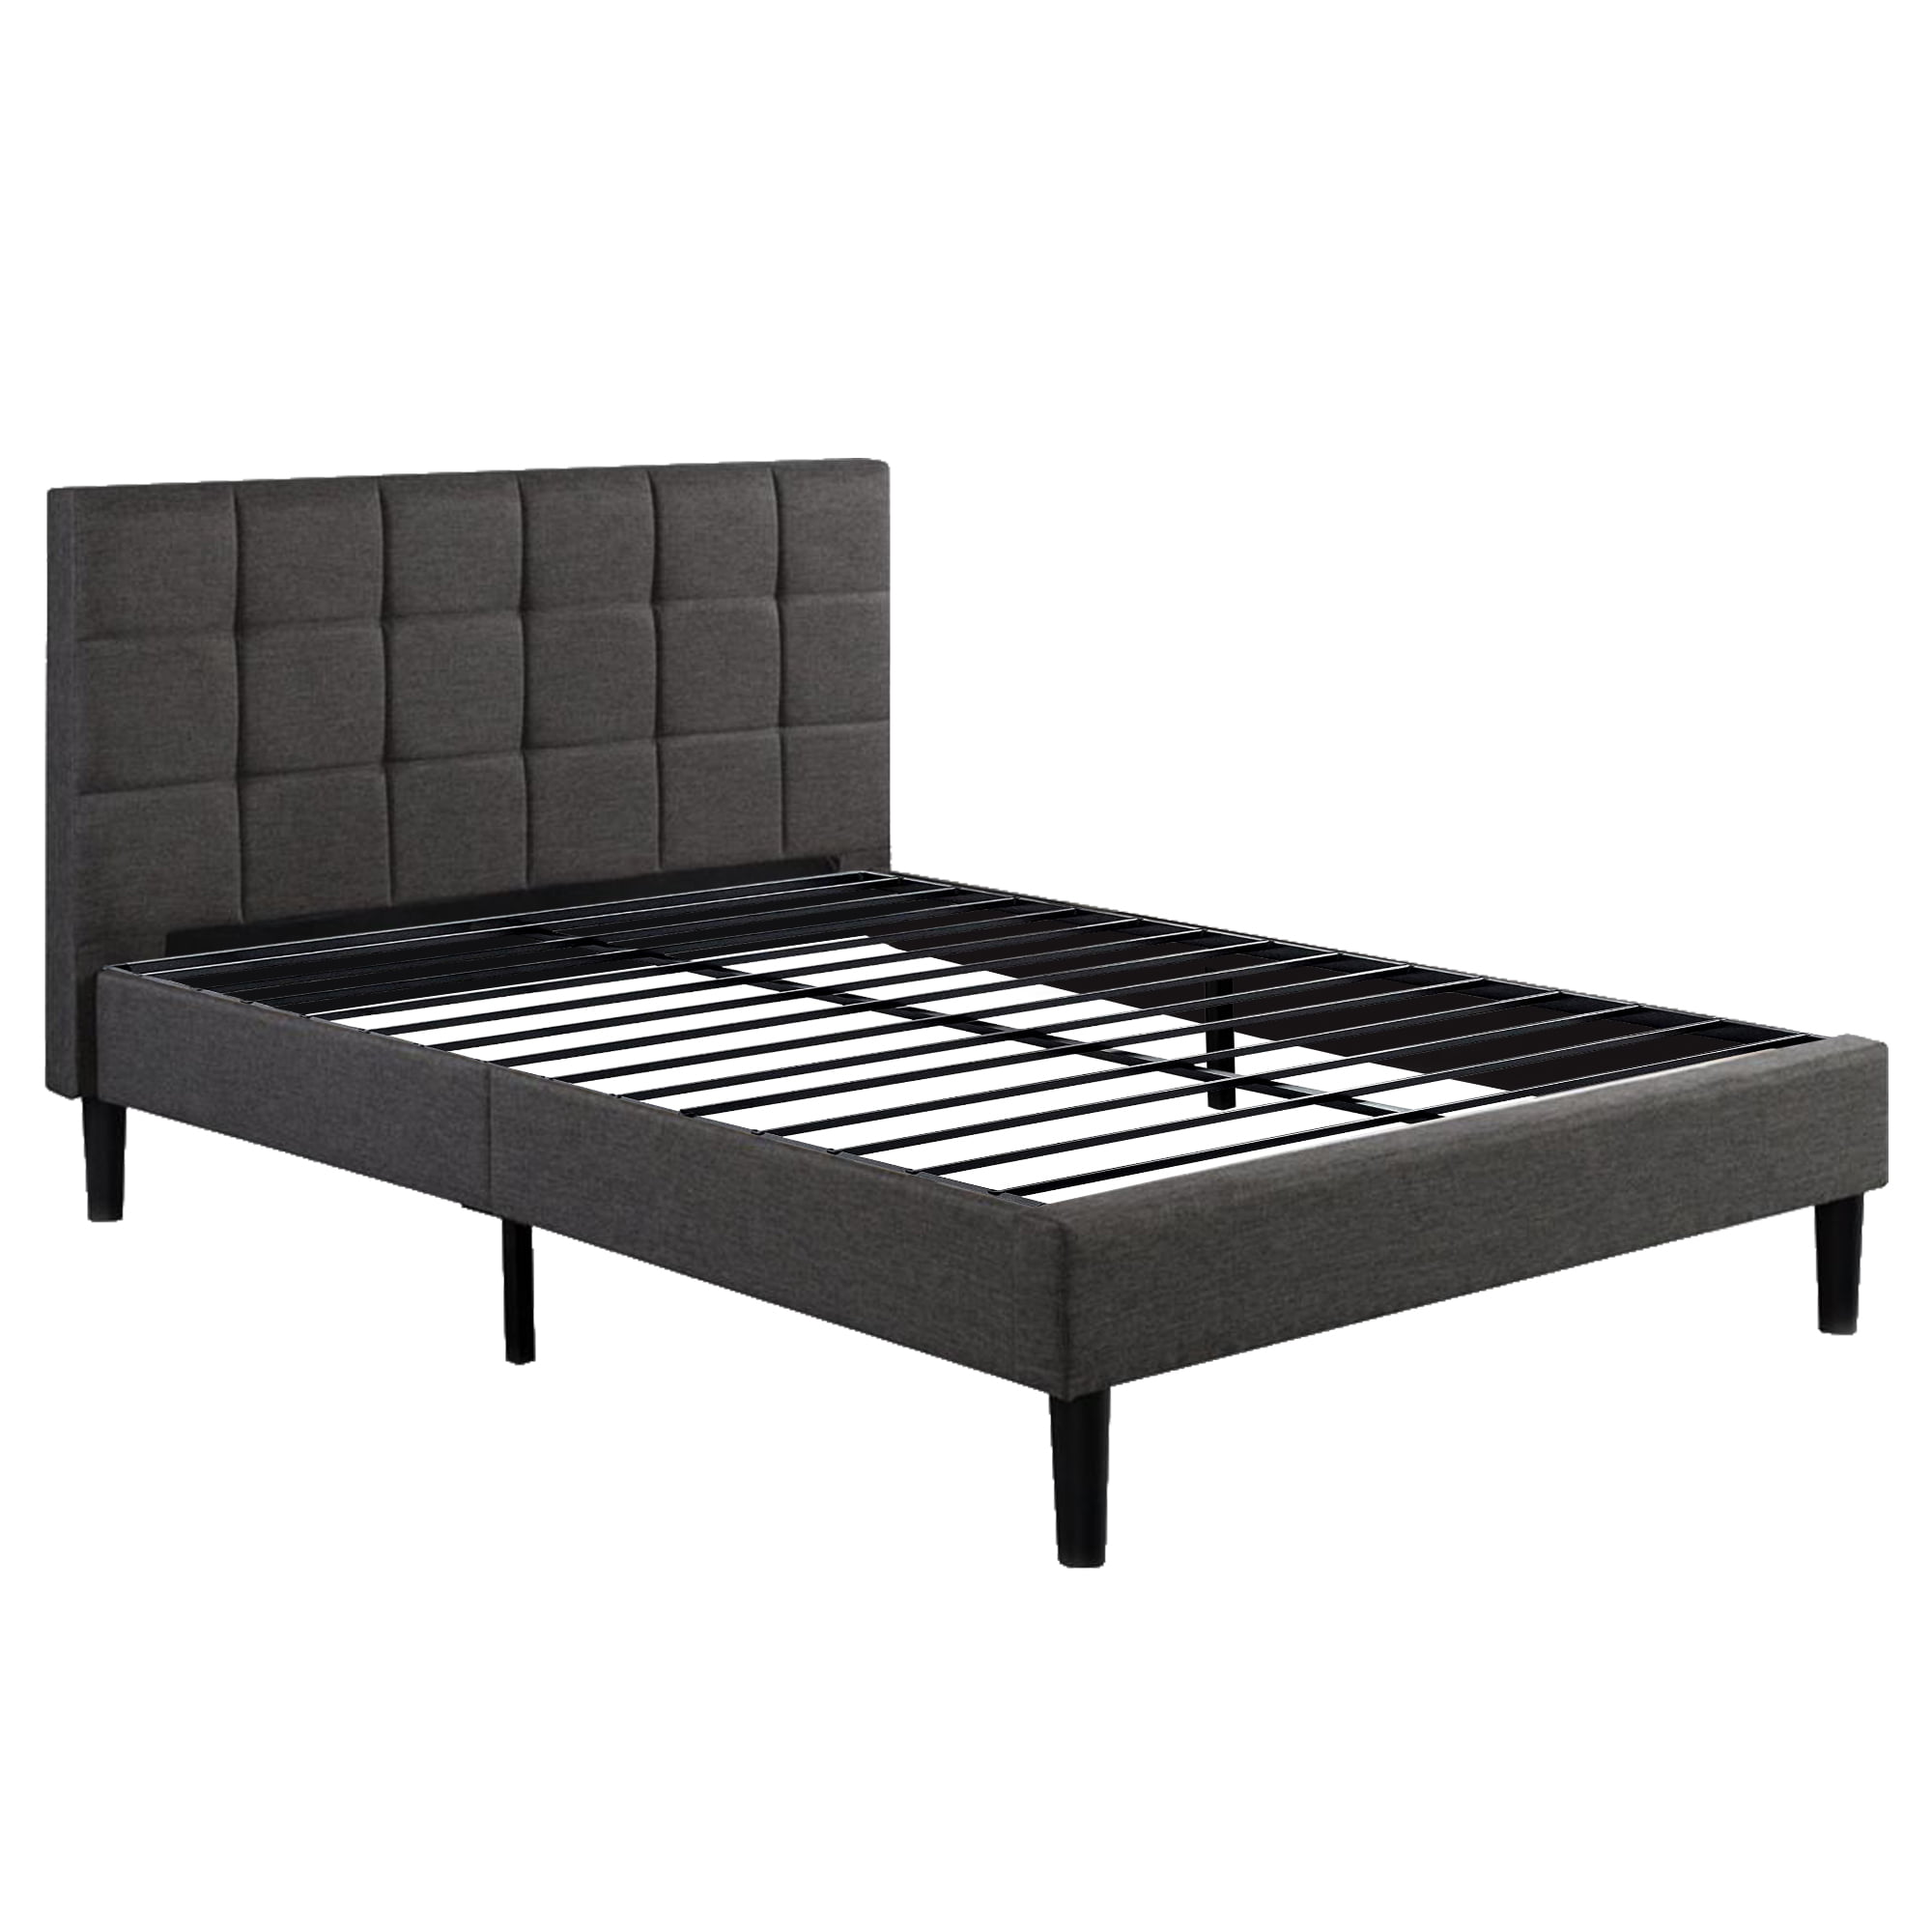 Bed Slat Replacement King Size, Recessed Sit In Platform Bed Frame